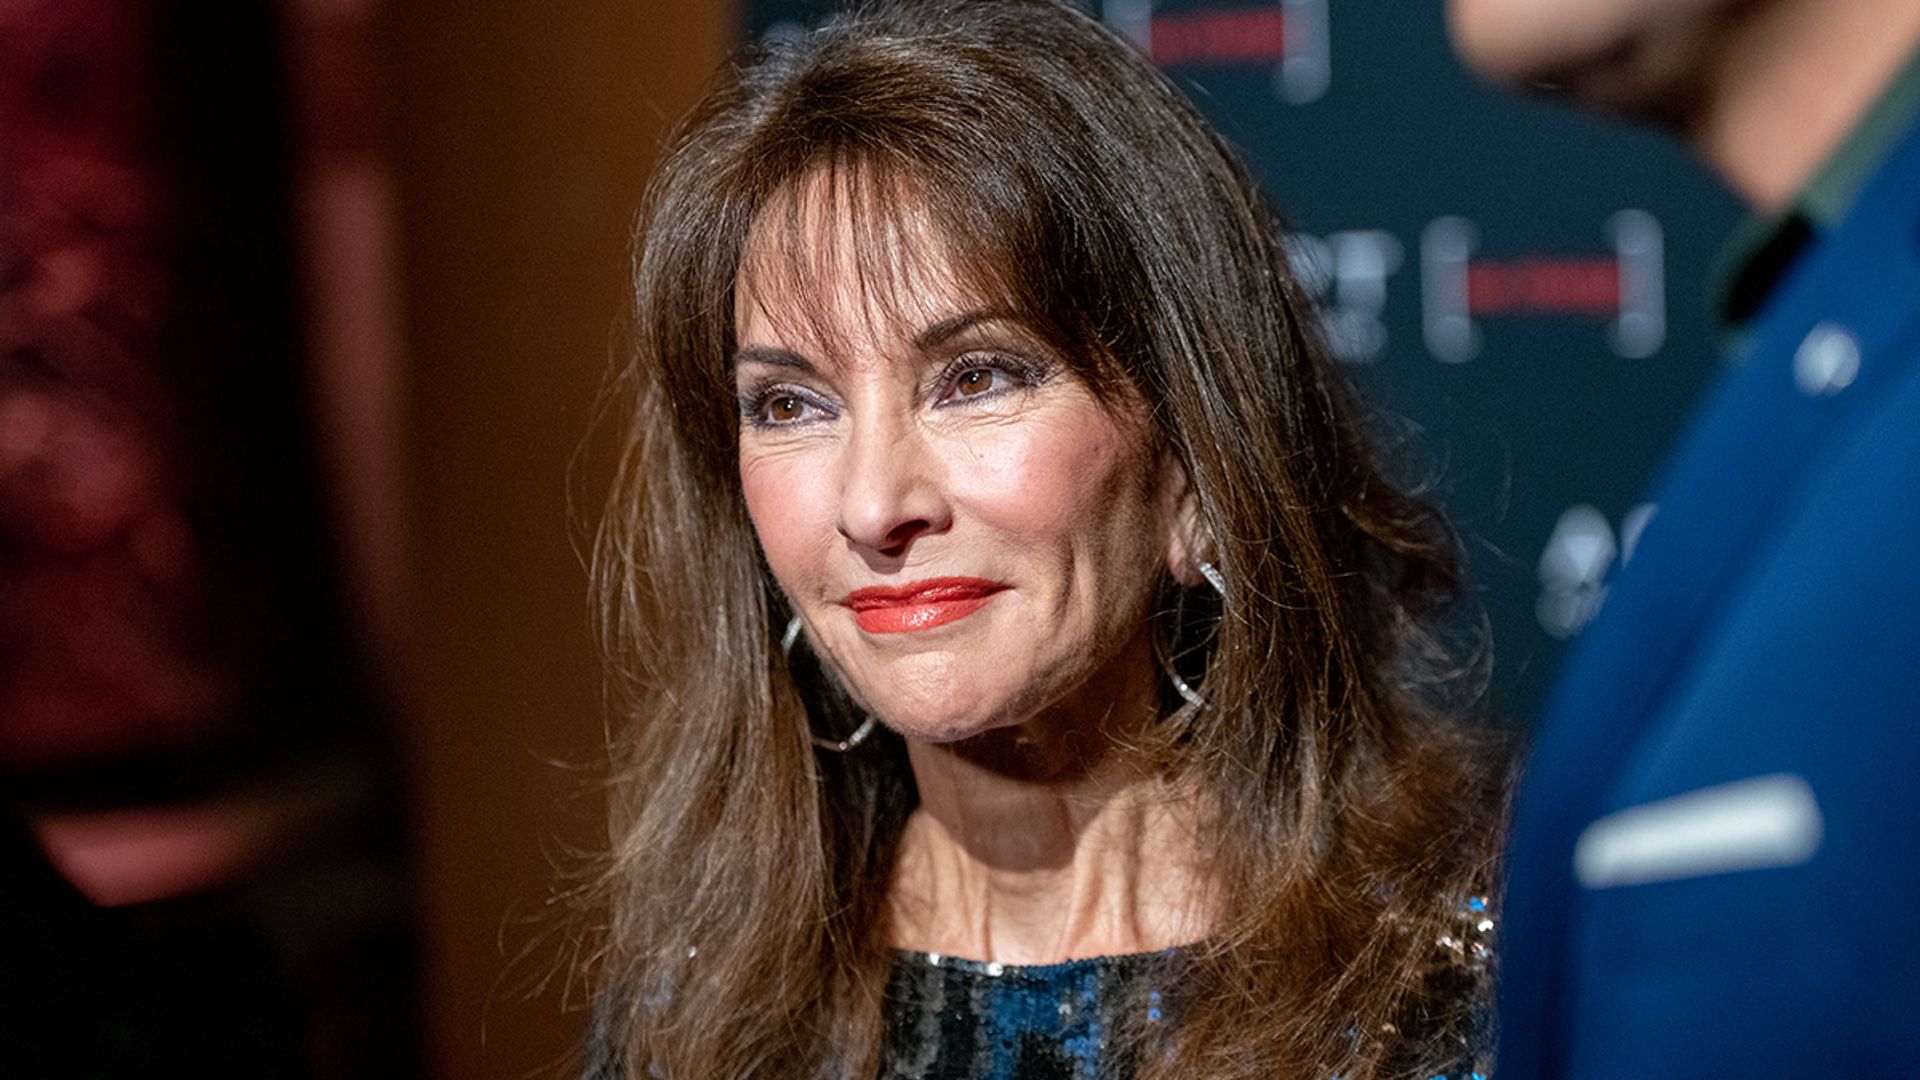 Susan Lucci Shares Heartbreaking Message Following Difficult Health Year As Fans Send Support 